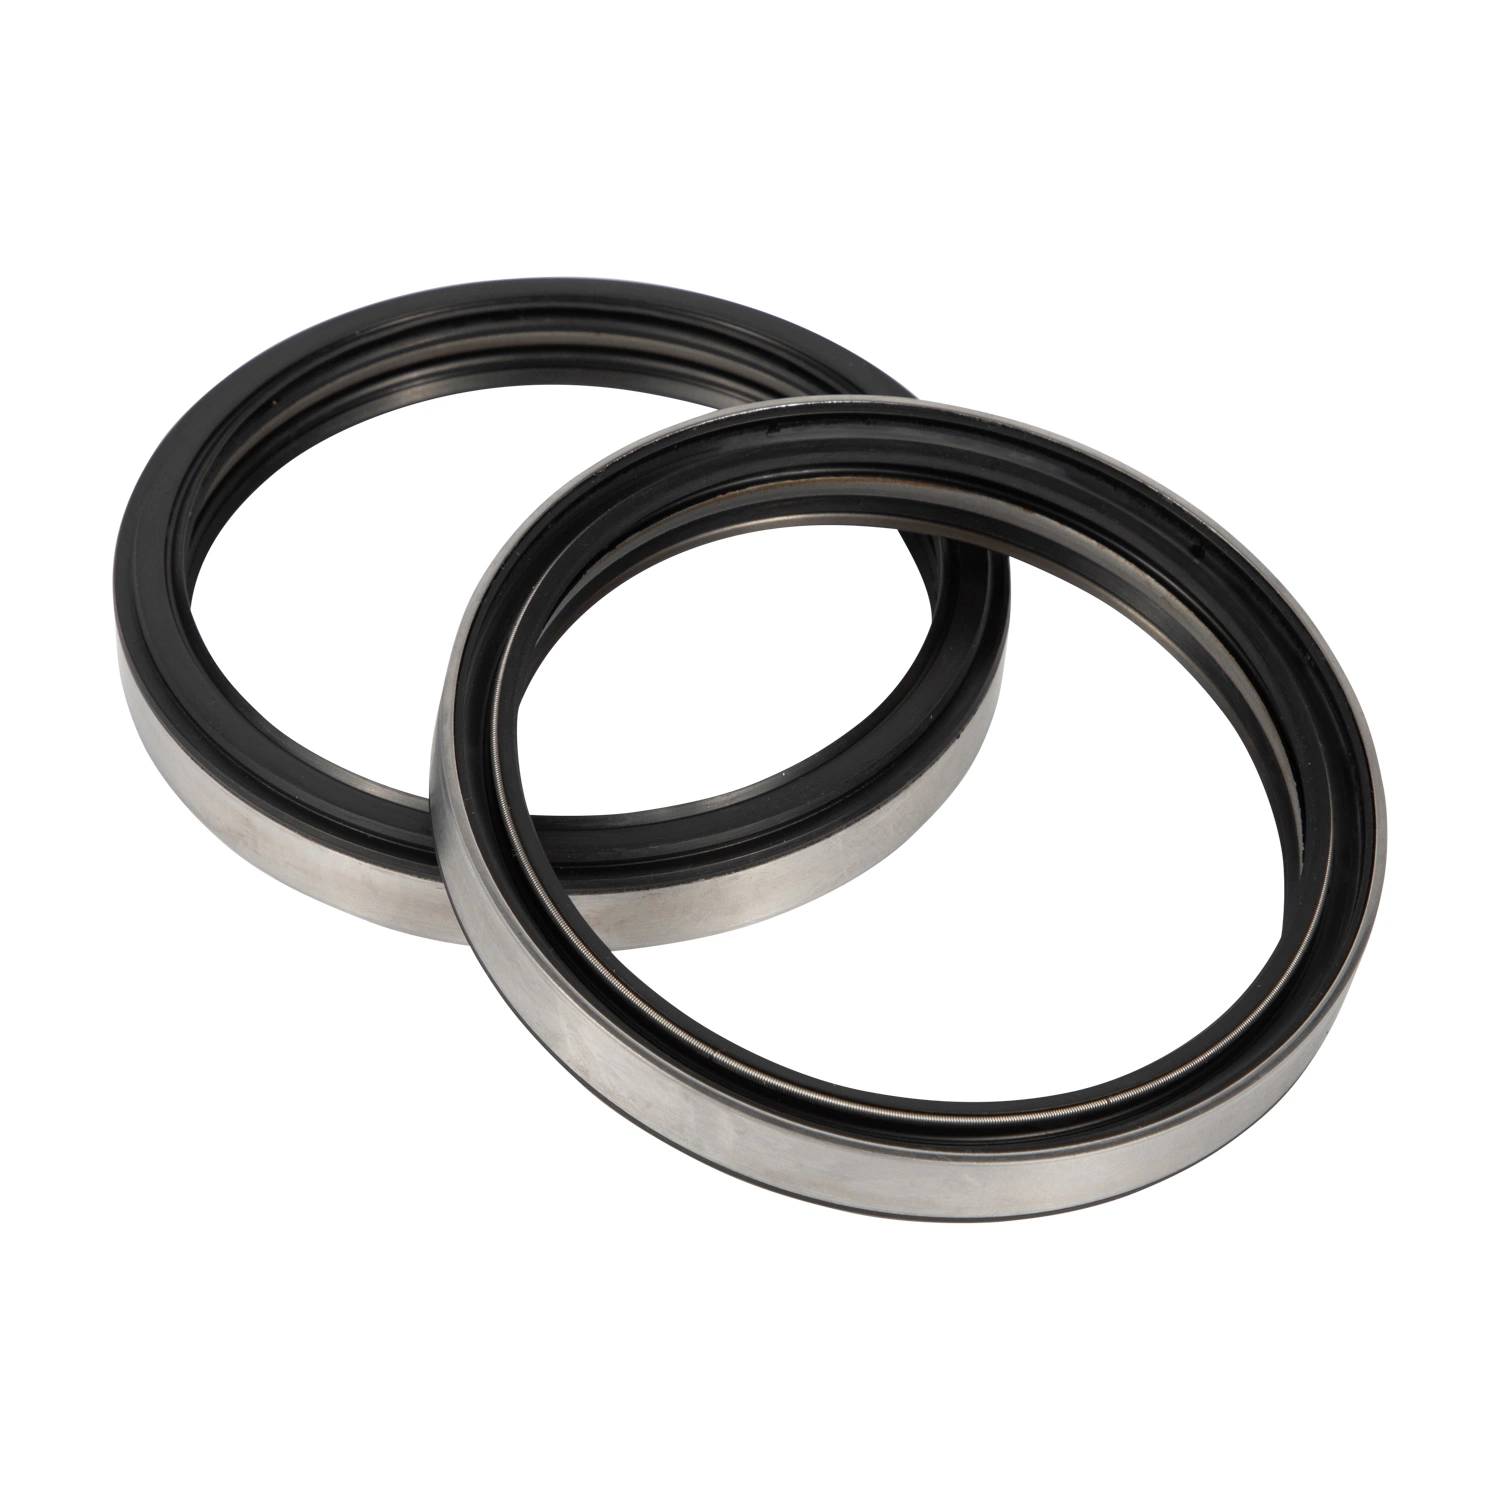 Customized Stainless Steel Rubber NBR Bonded Seals / Spring Bonded Seal Washer